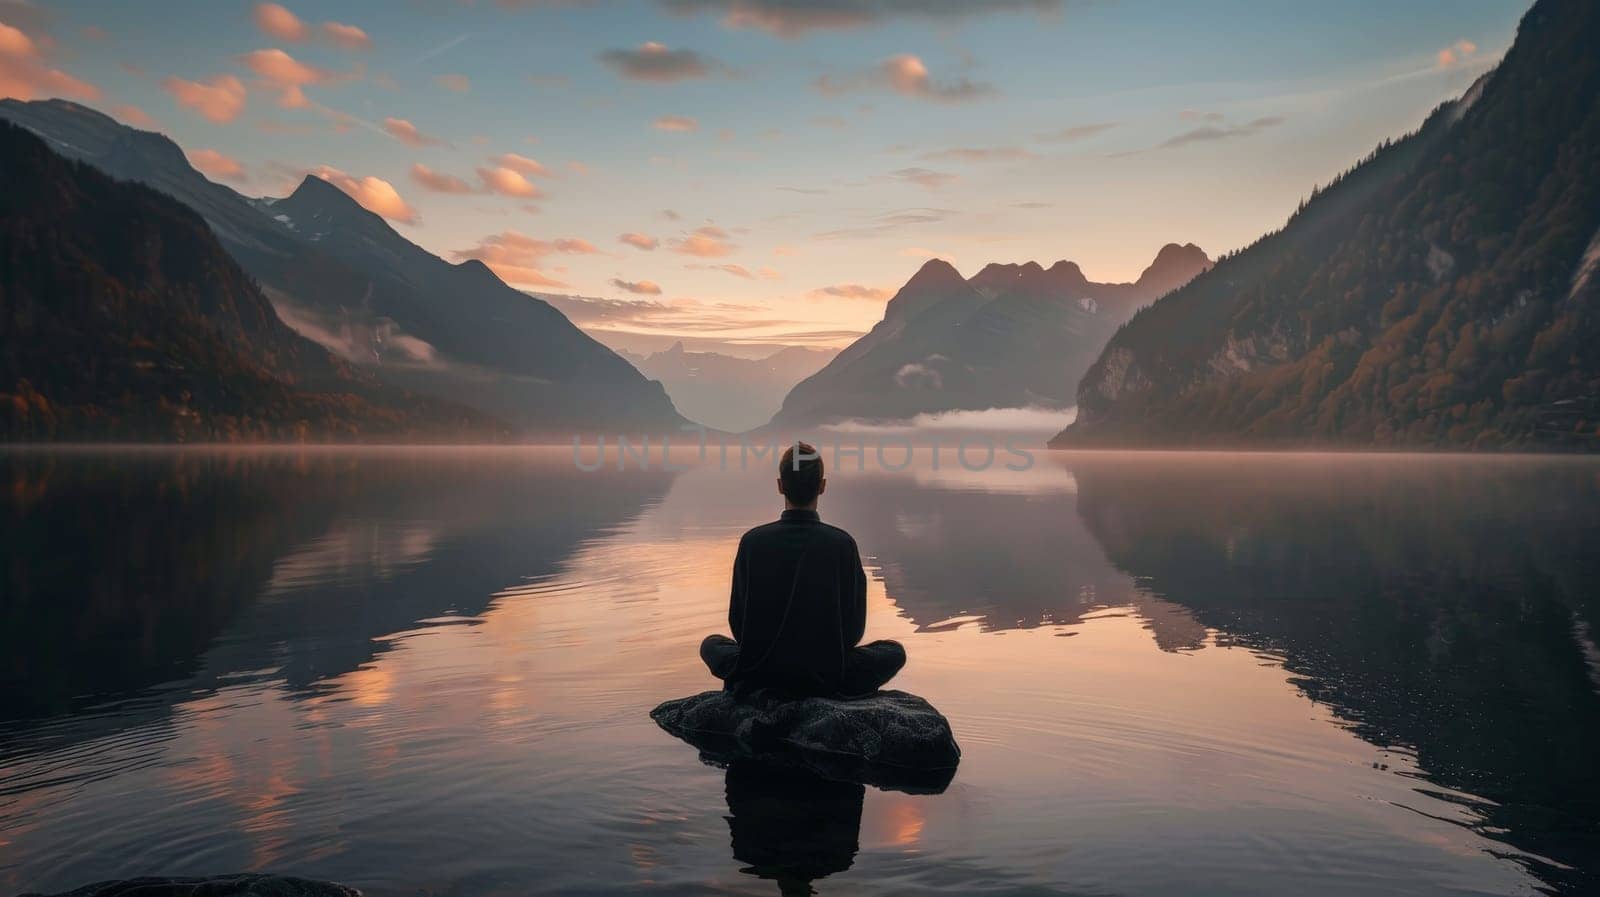 A man is sitting on a rock in front of a lake. The sky is orange and the water is calm. The man is in a peaceful and serene state of mind